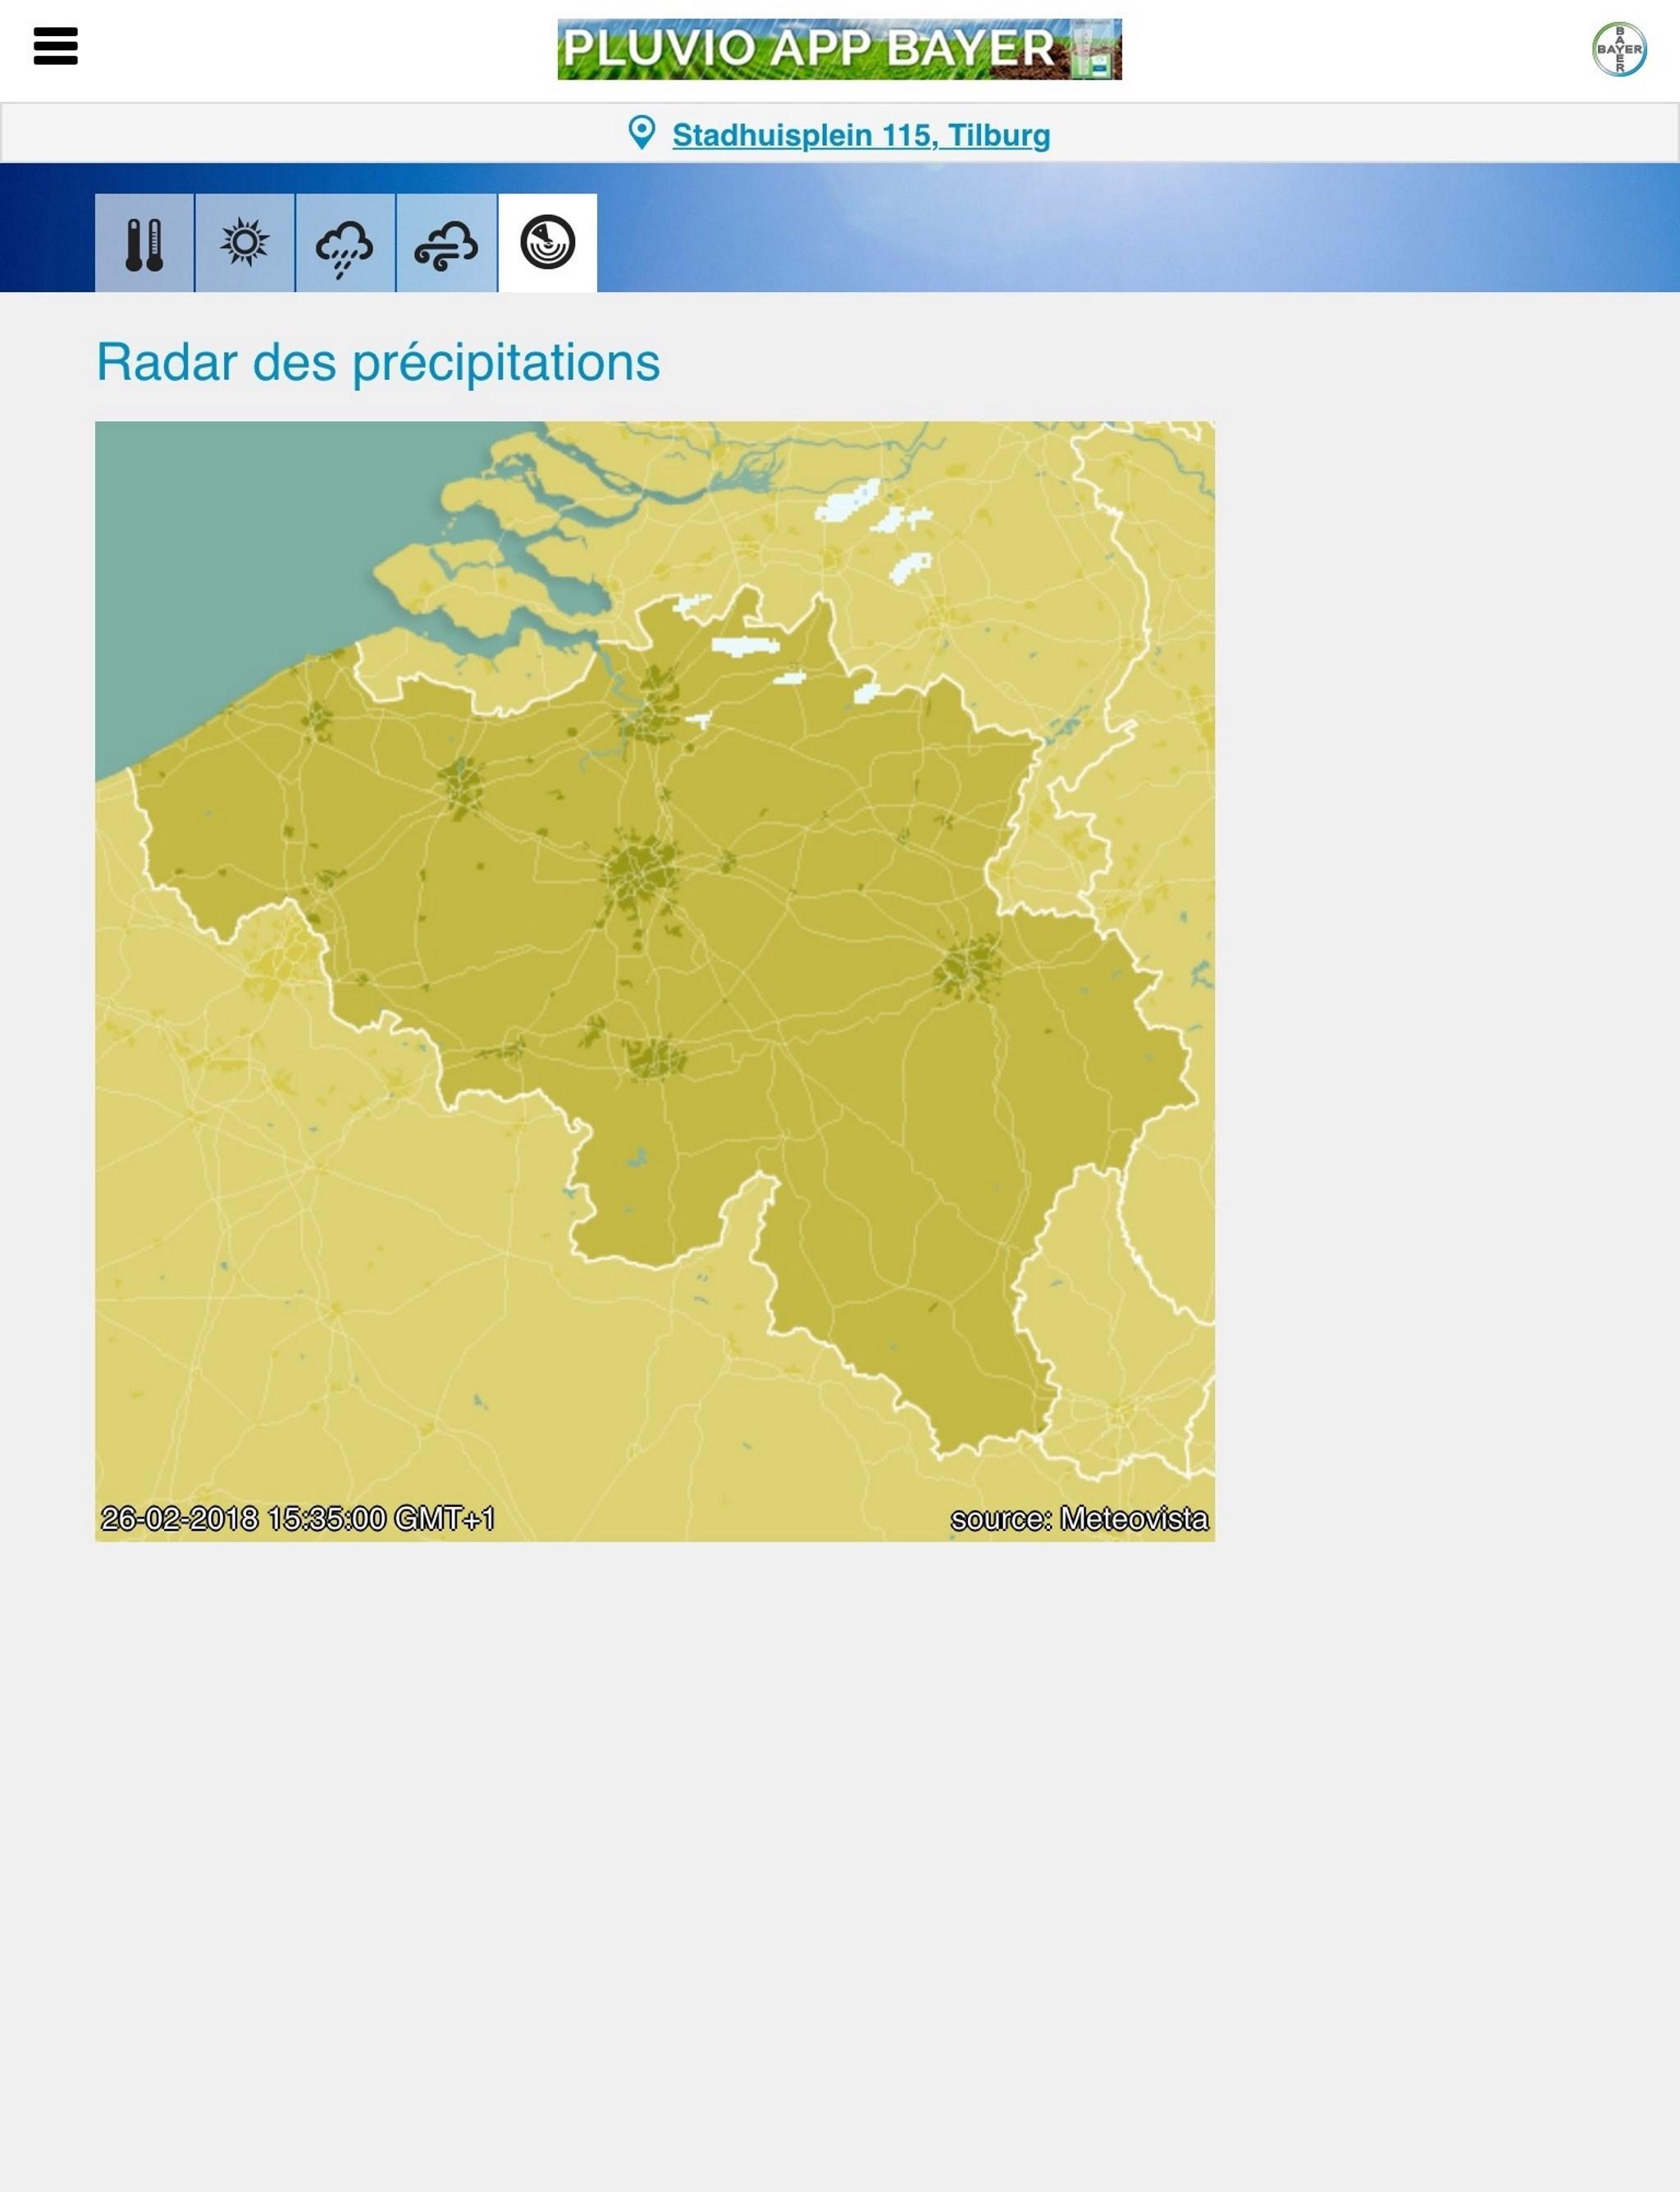 Weer Météo Bayer for Android - APK Download